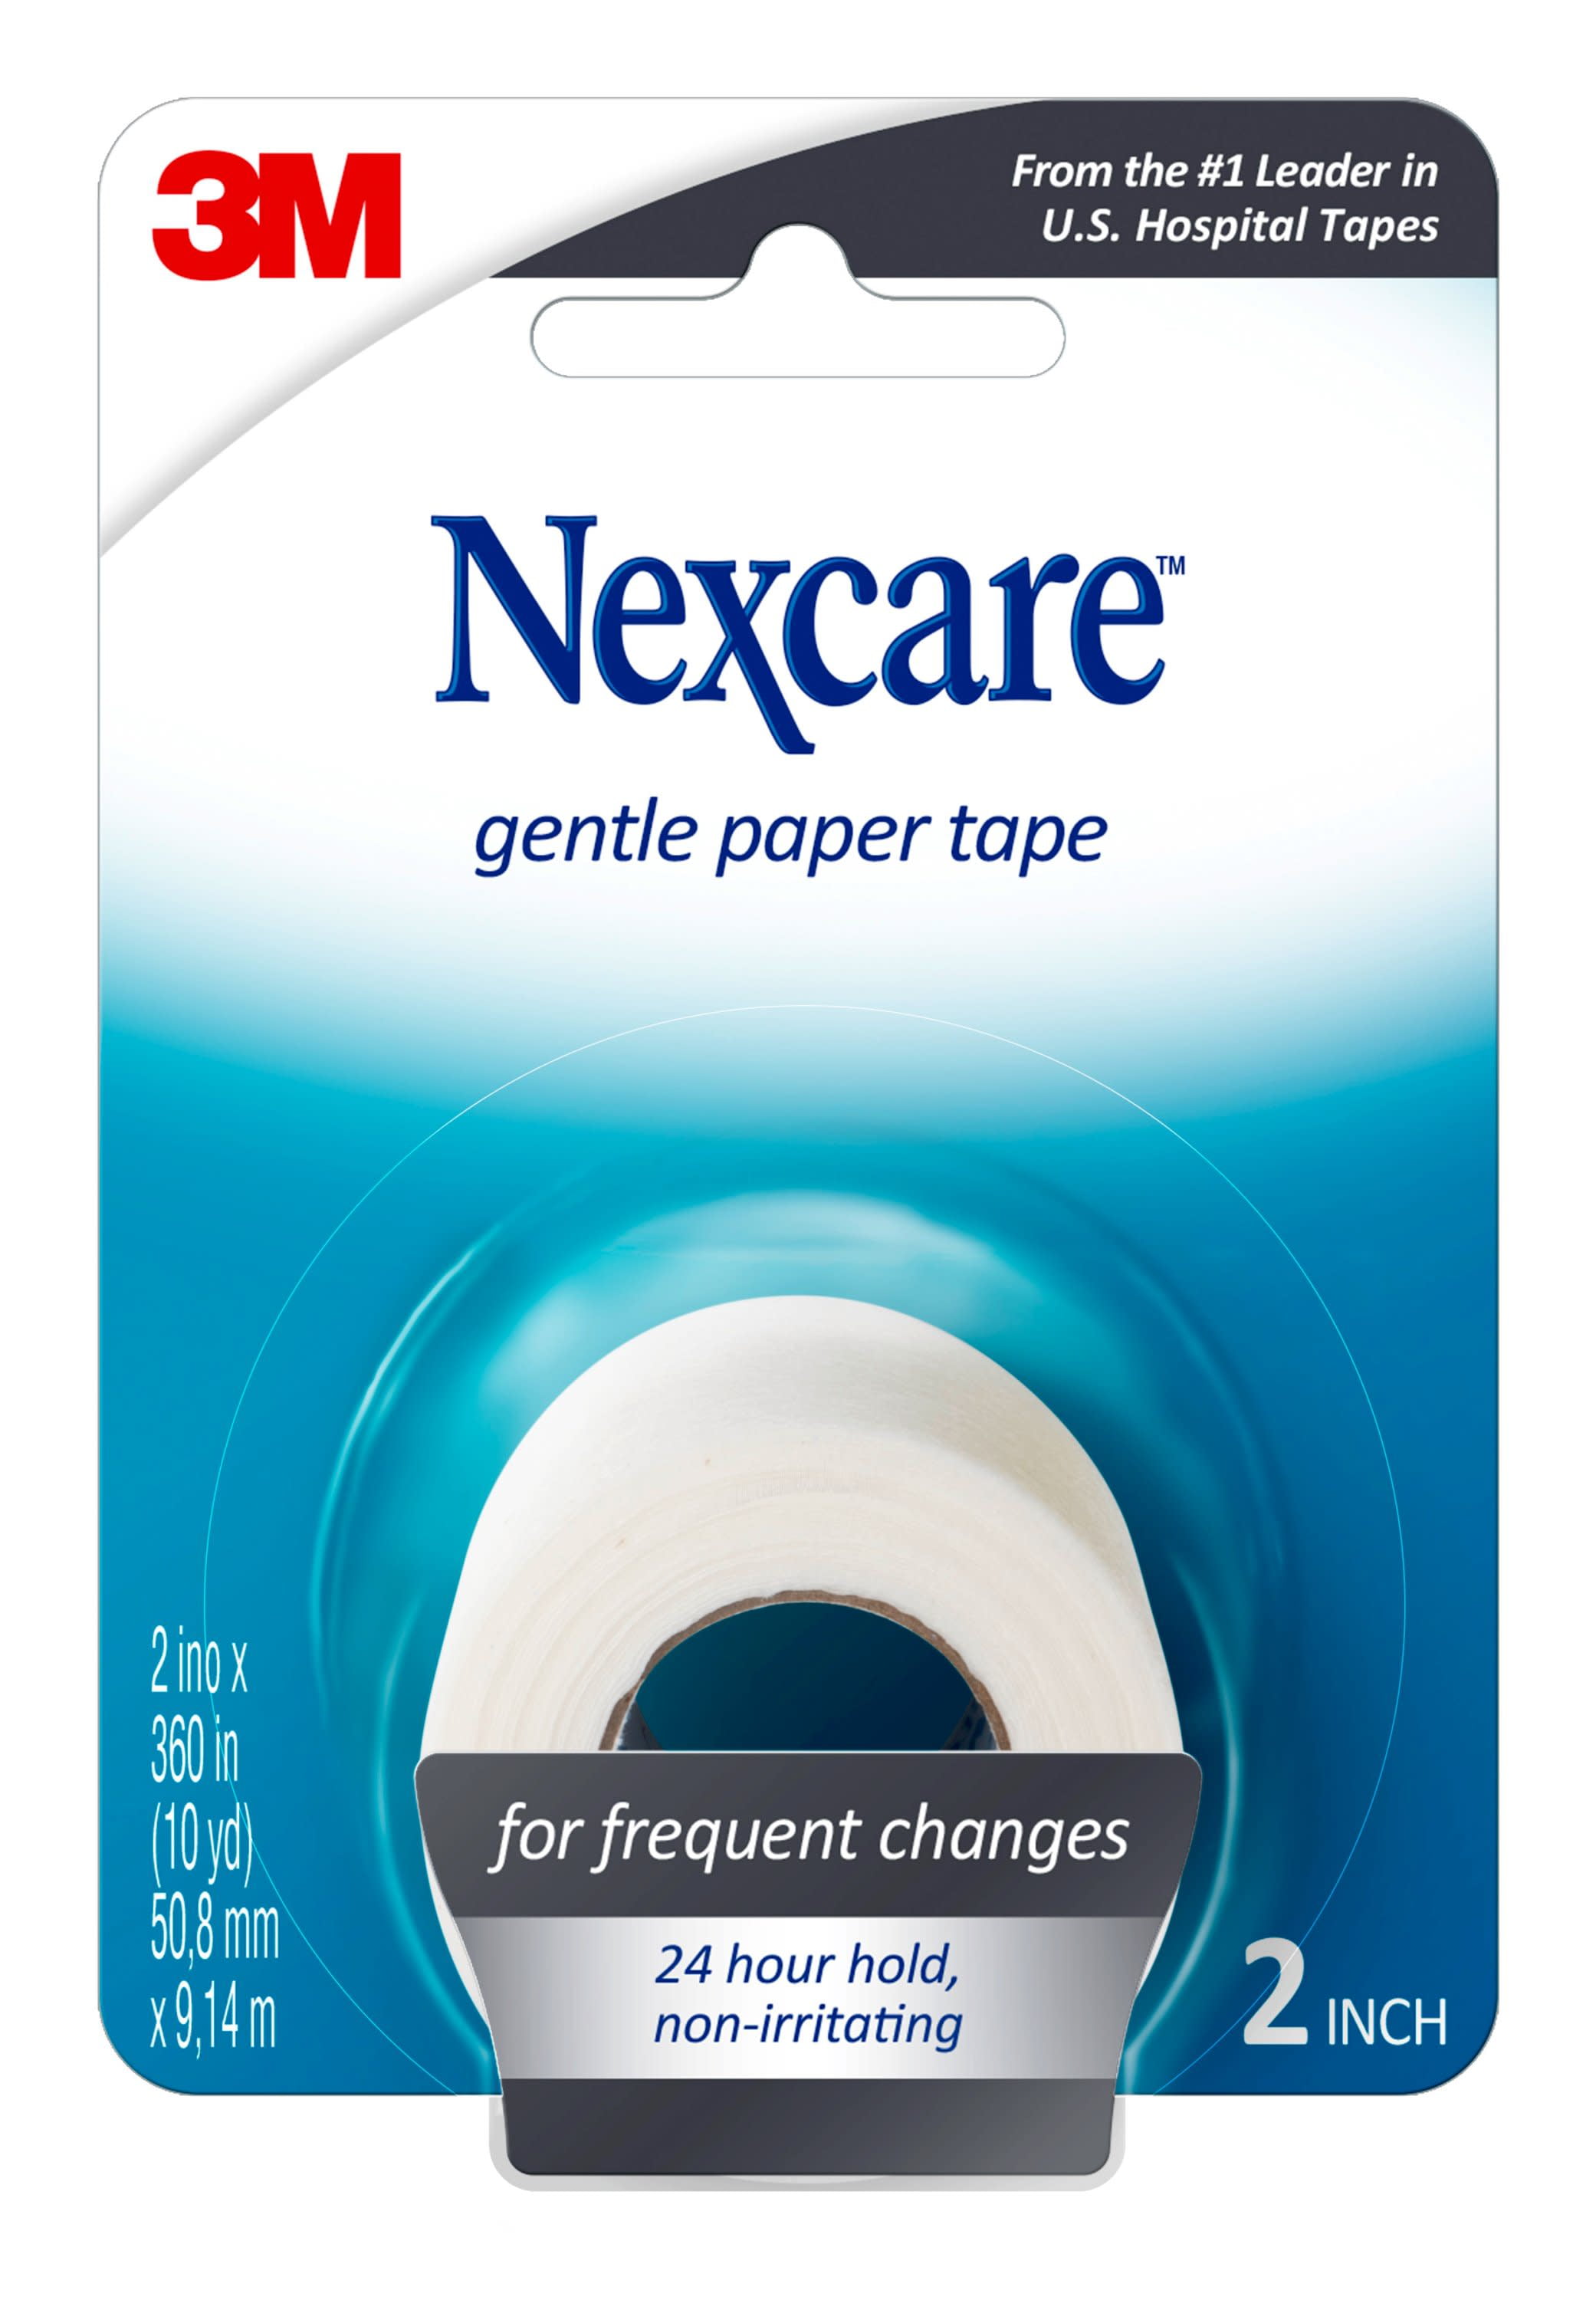 Two Gentle Paper Tape 2.5 cm x 914cm (1 x 360) per roll, Hypoallergenic  Medical Tape, Rejuveness Tape (2 inches x 33 feet) 